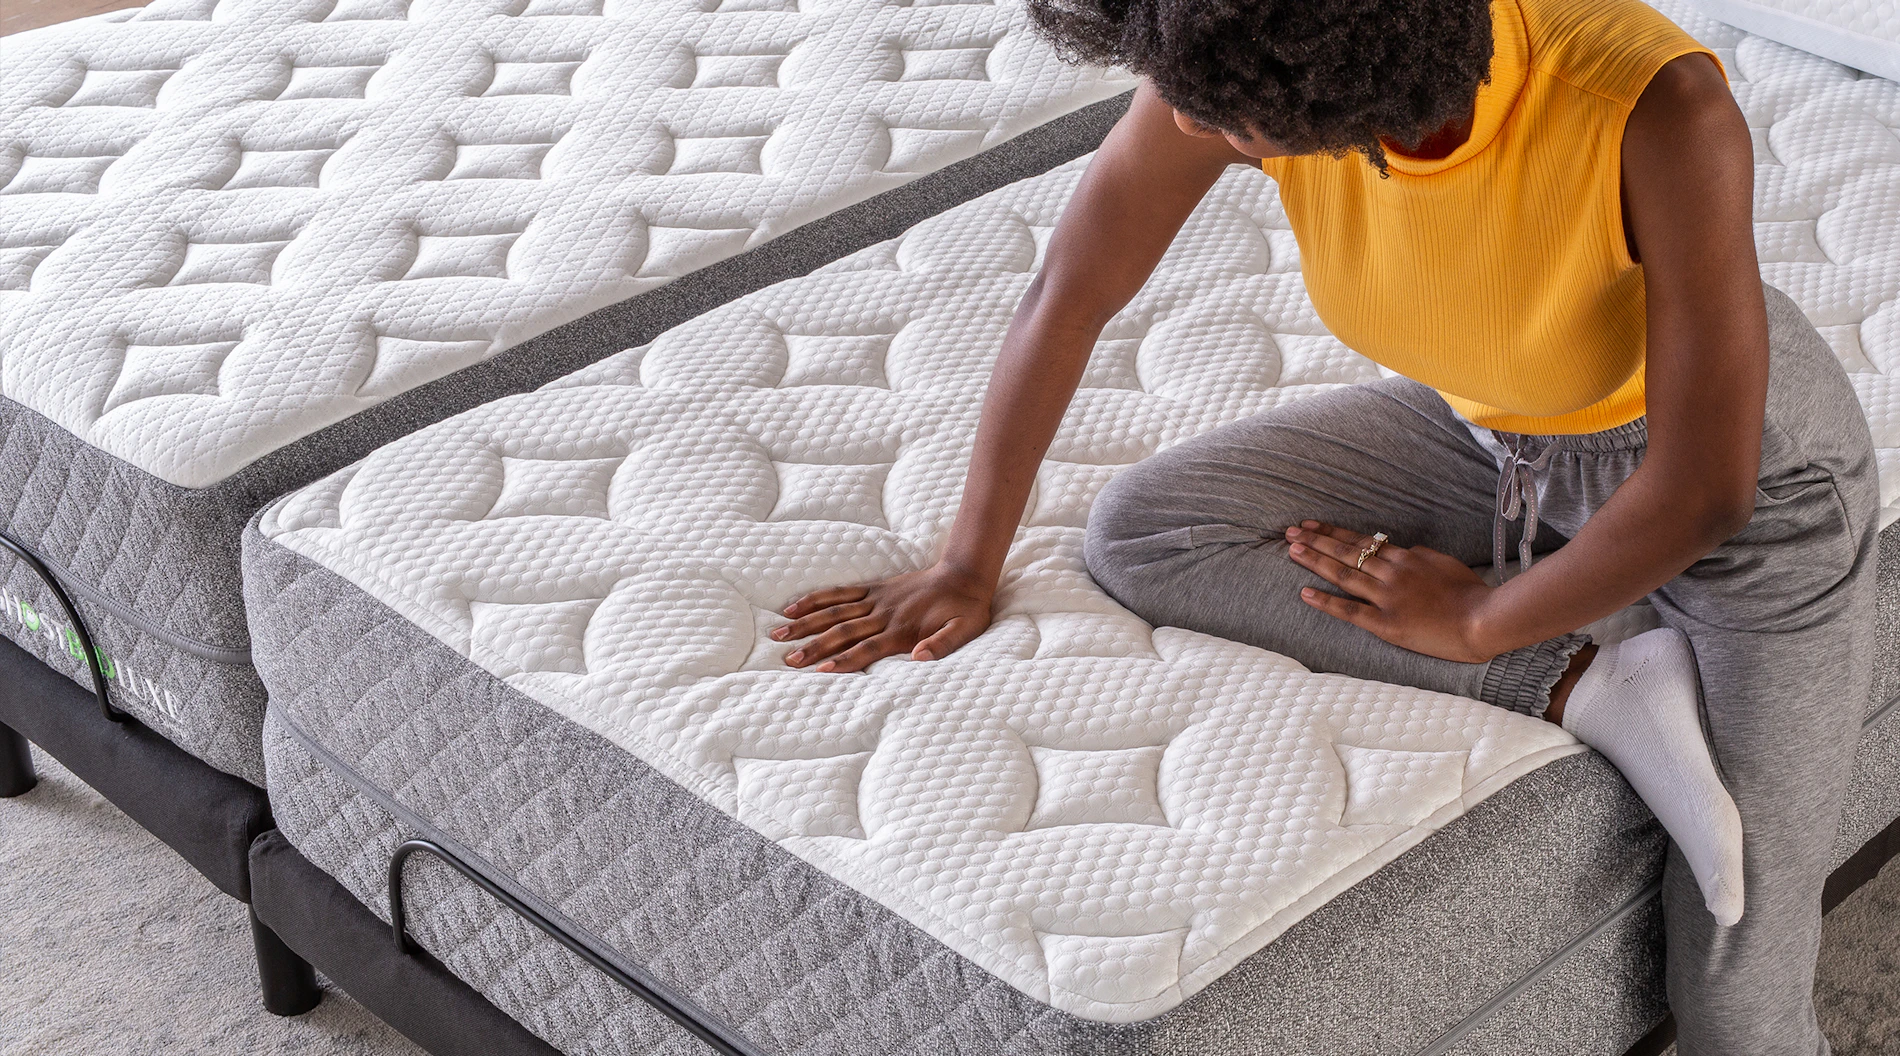 GhostBed uses high-quality, cooling materials in all its mattresses.